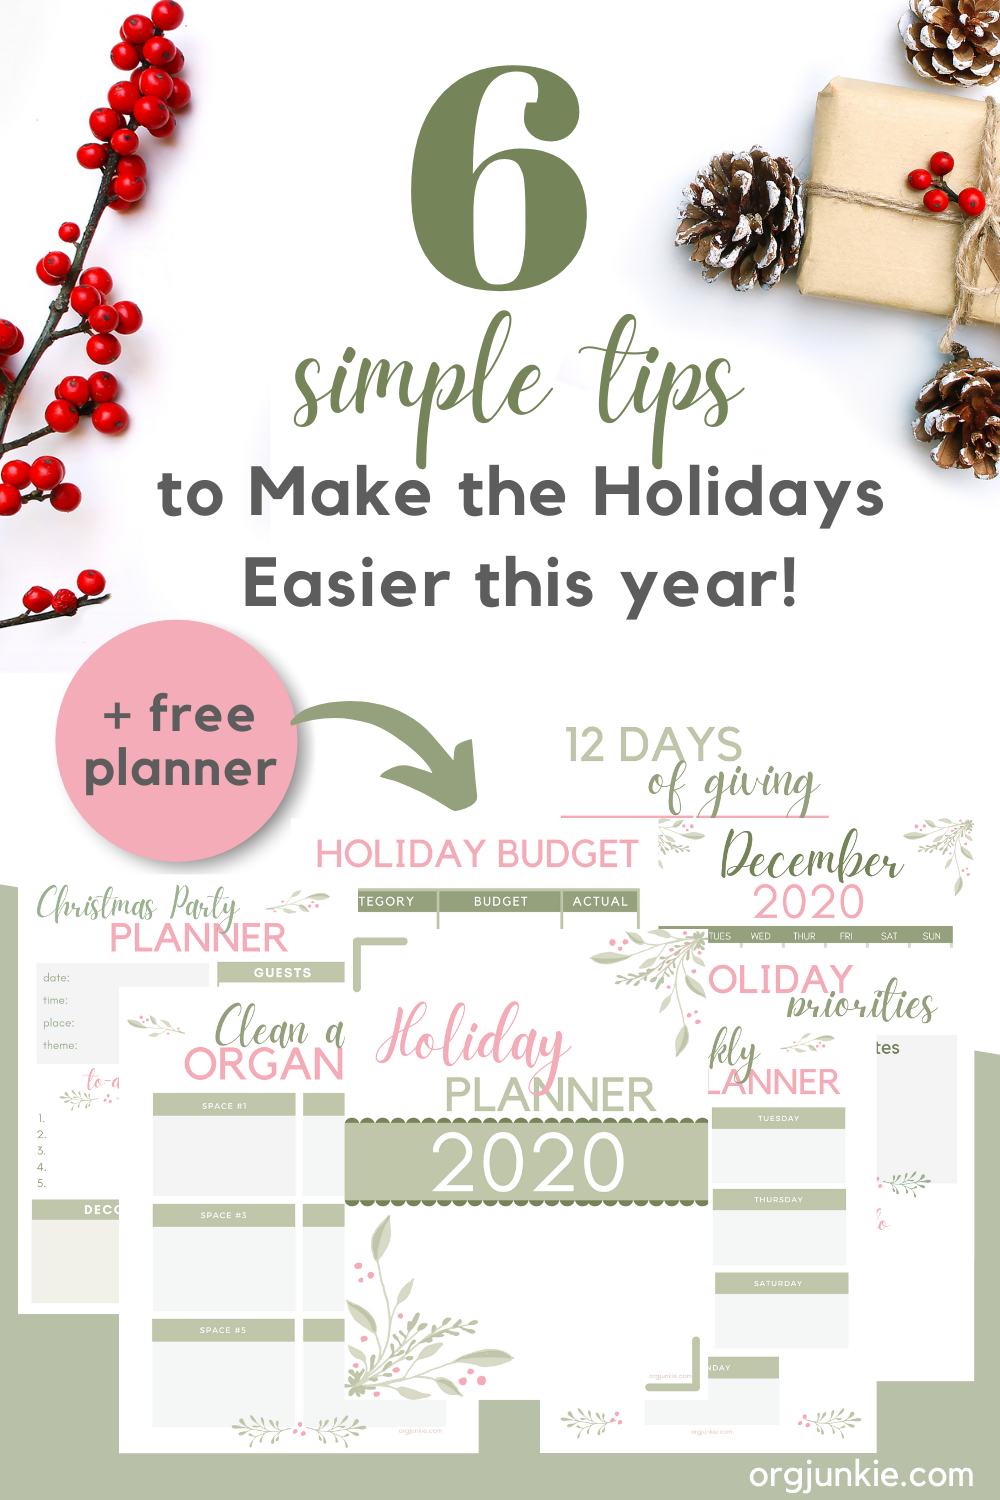 Free Printable Holiday Planner to Help You Stay Organized This Season at I'm an Organizing Junkie blog